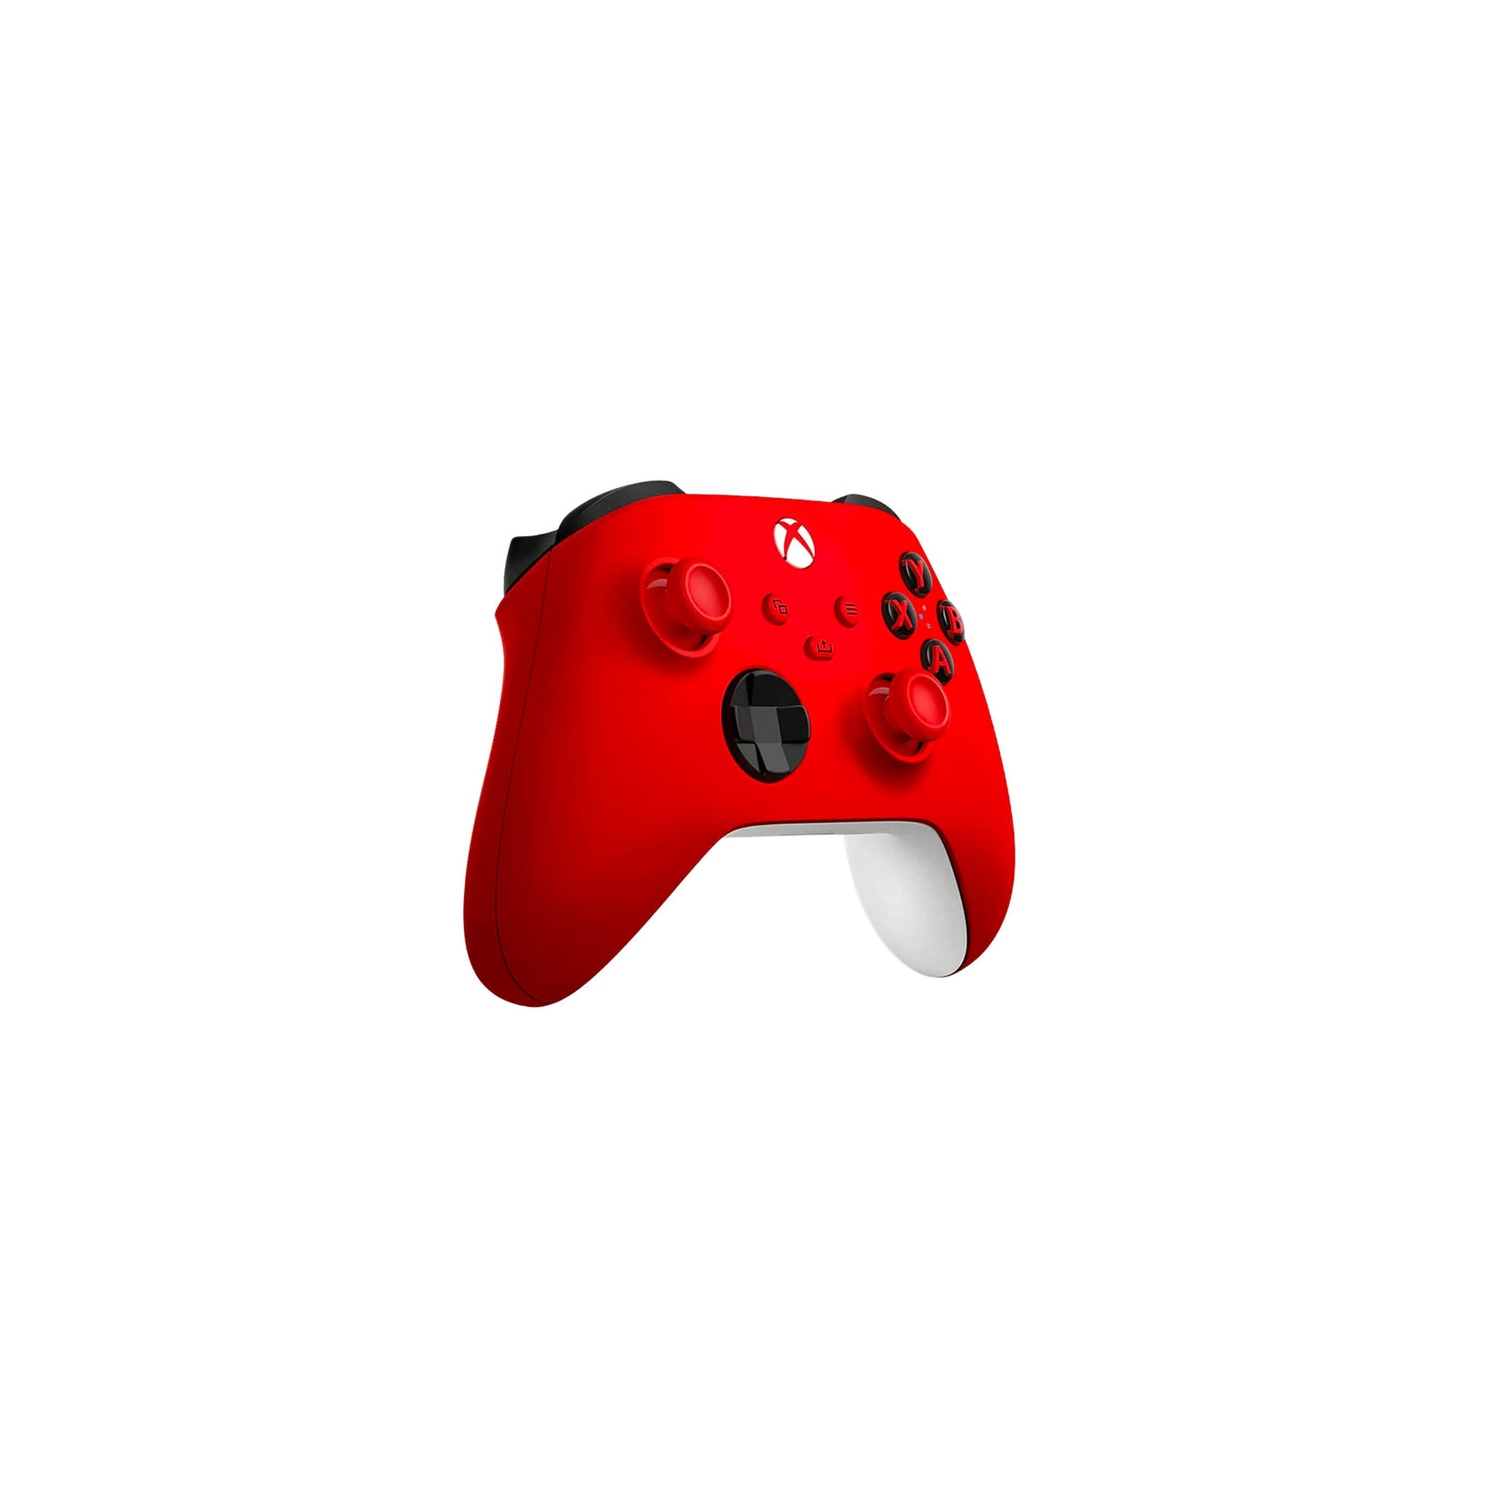 Refurbished (Good) - Xbox Wireless Controller - Xbox Series X|S, Xbox One – Pulse Red